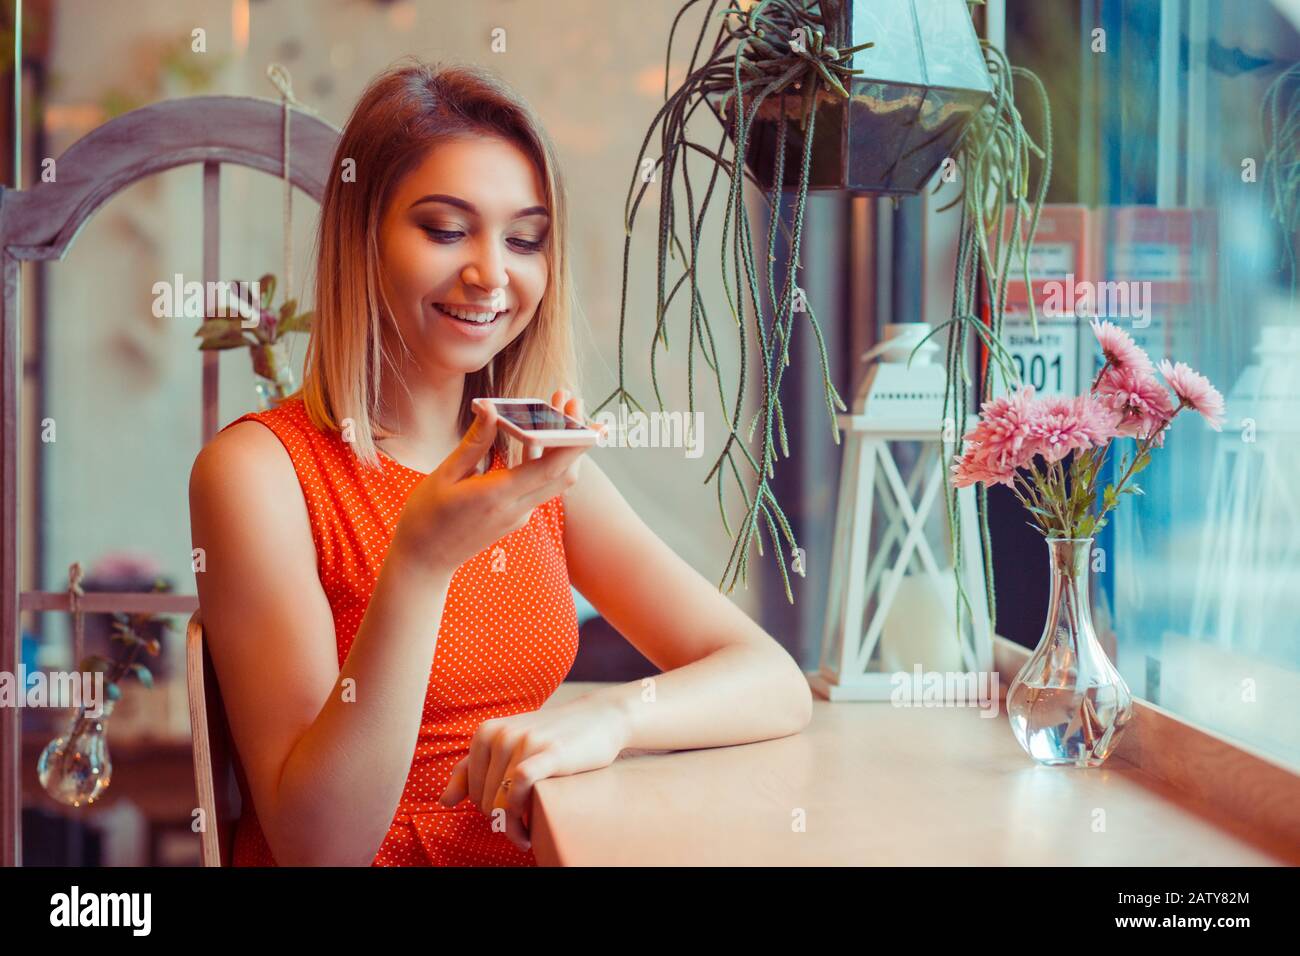 Portrait of a girl using the voice recognition of the phone and looking at cell phone near a window of a house or coffee shop Stock Photo